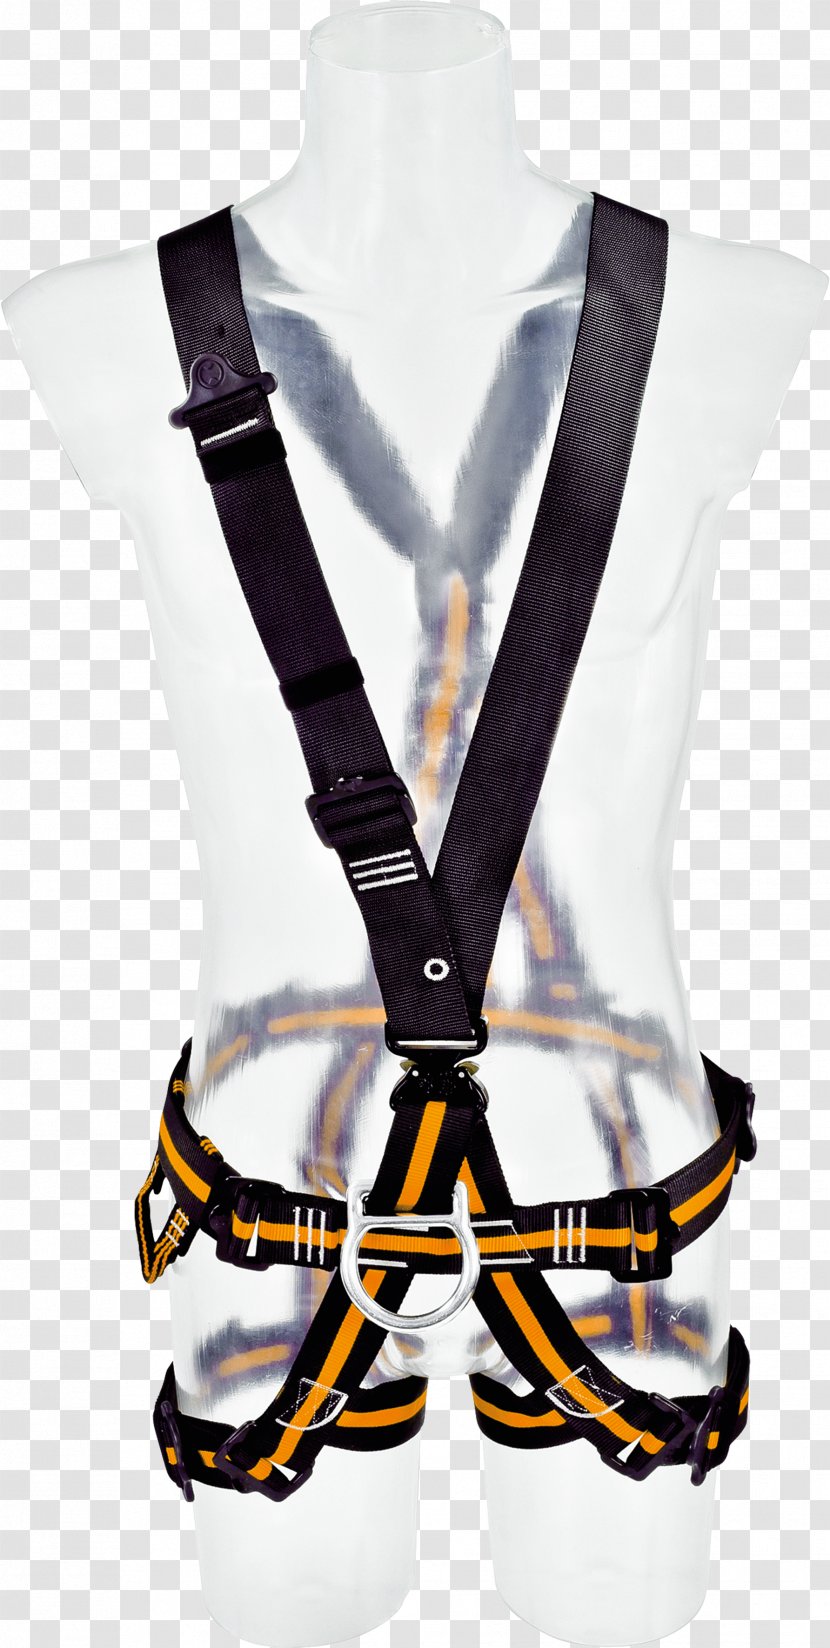 Climbing Harnesses SKYLOTEC Safety Harness Protection - Skylotec Transparent PNG